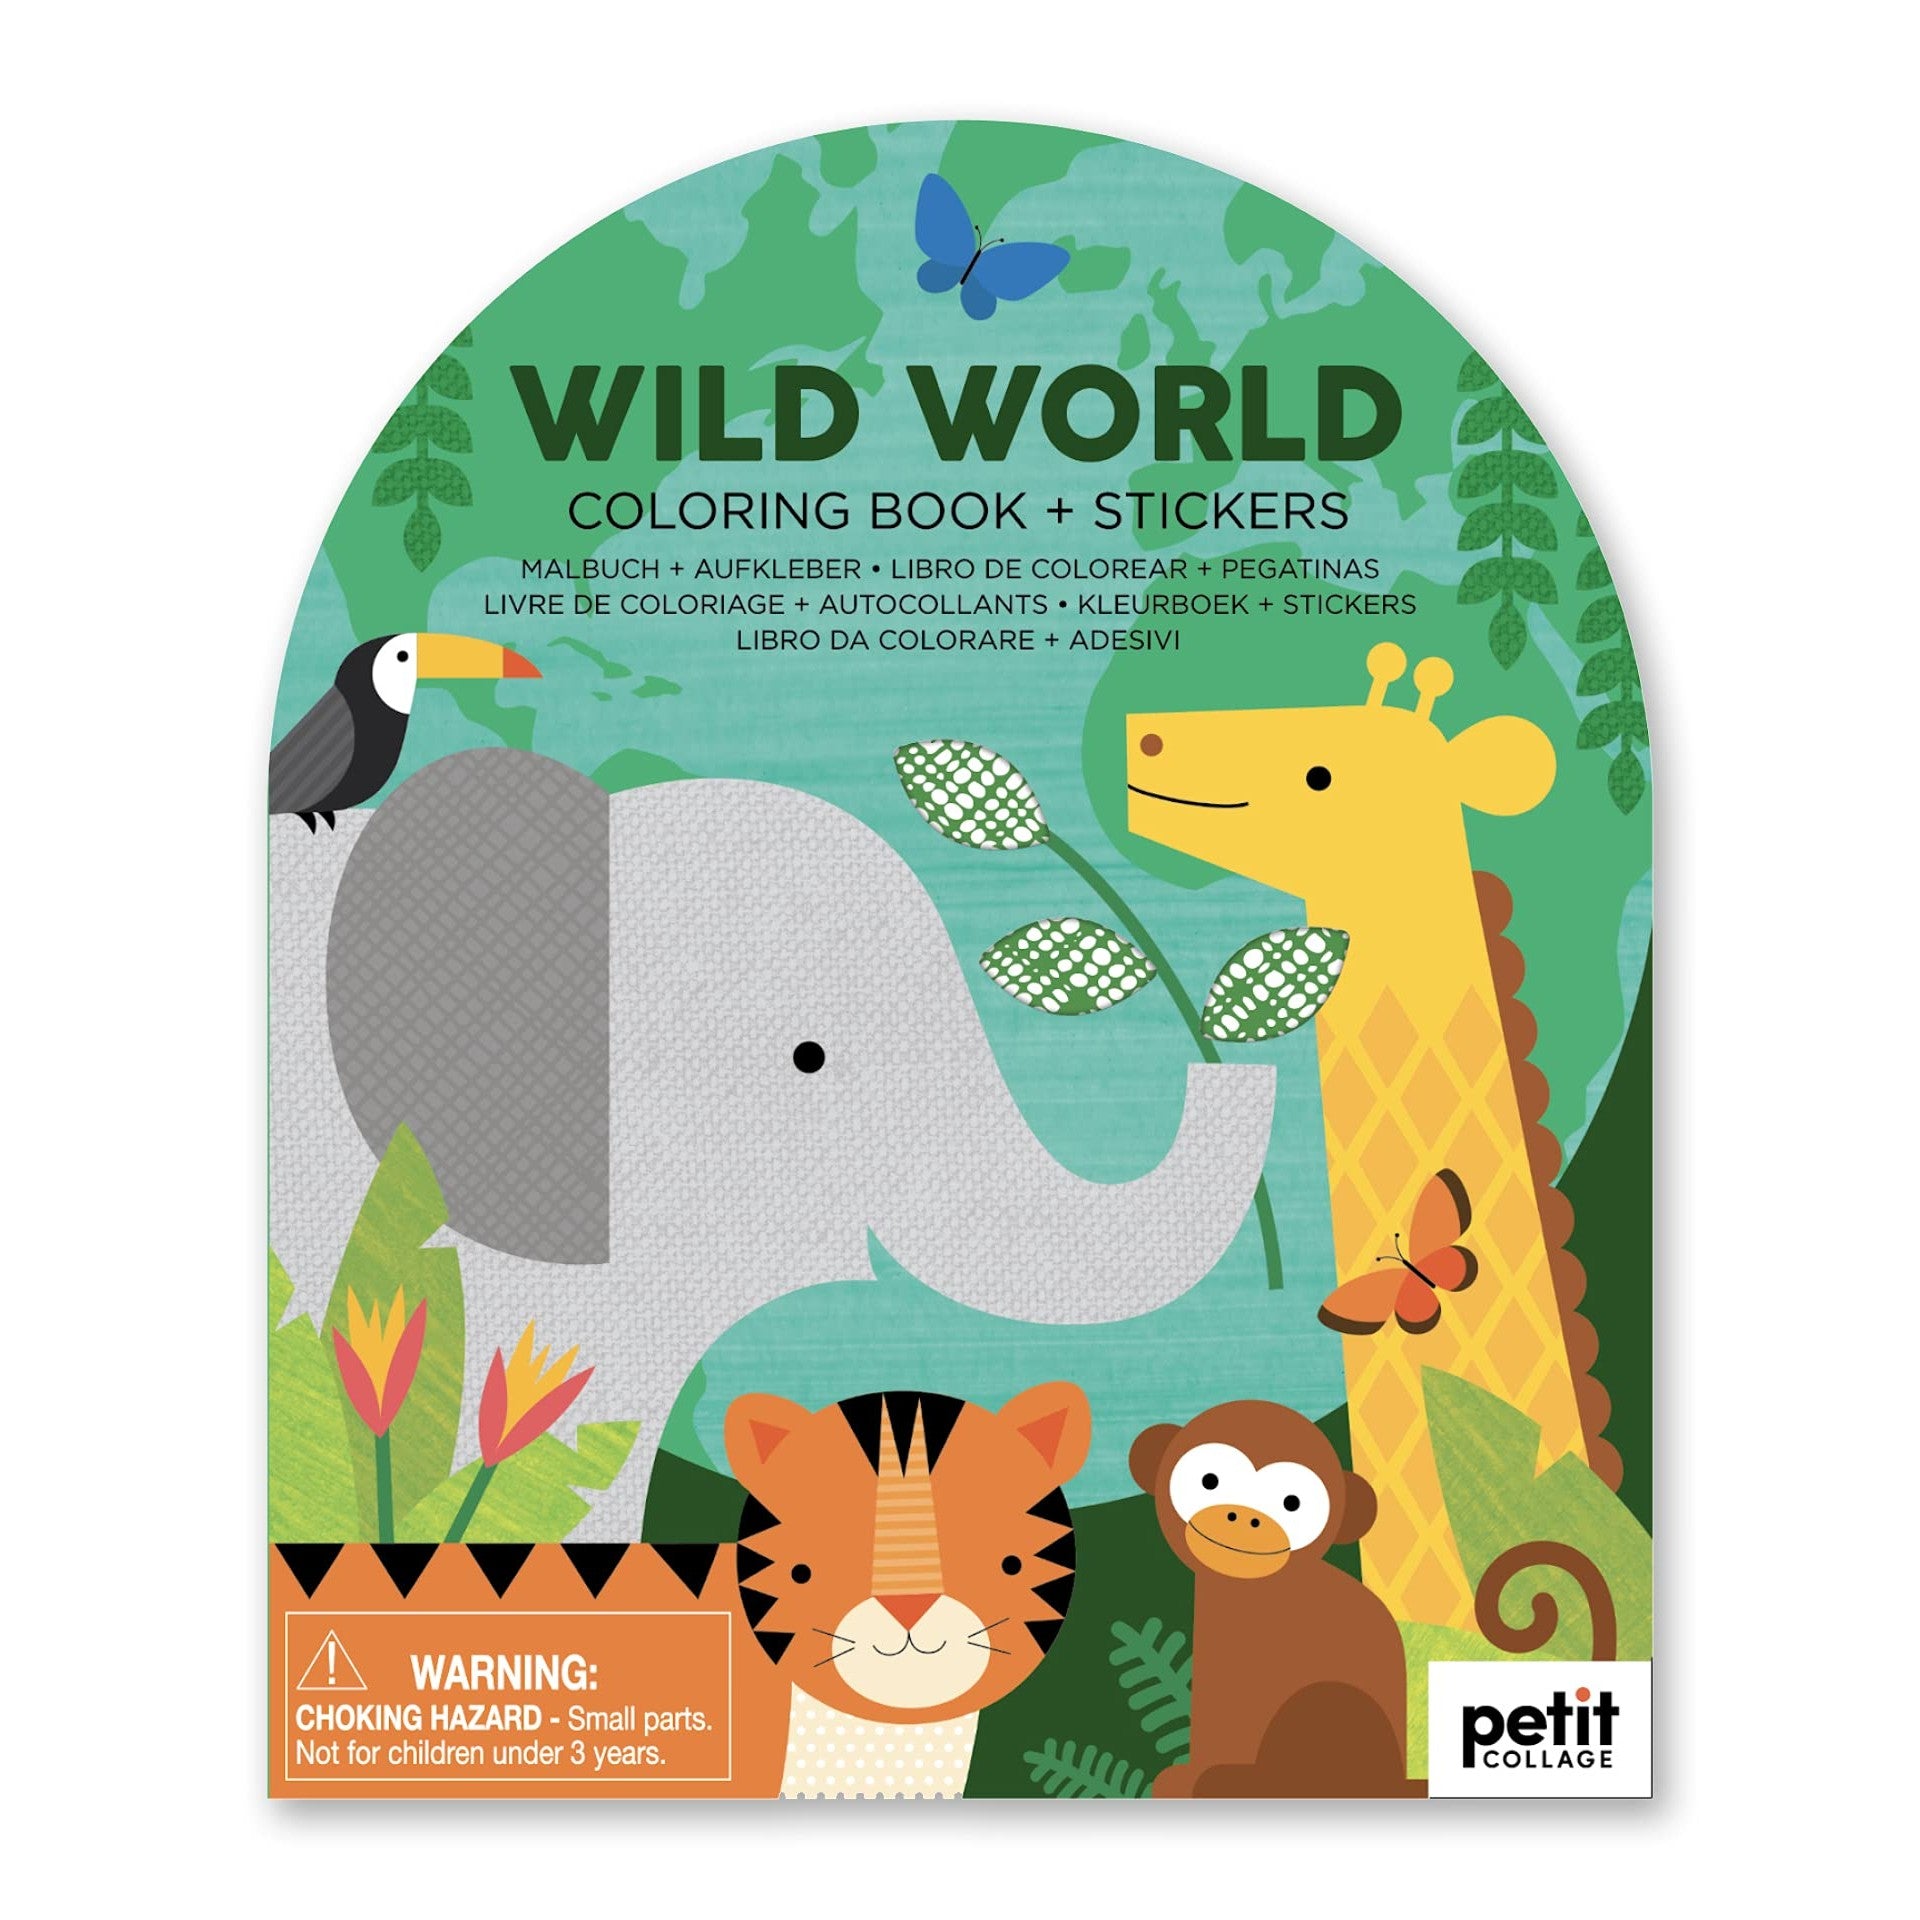 Wild World Coloring Book + Stickers